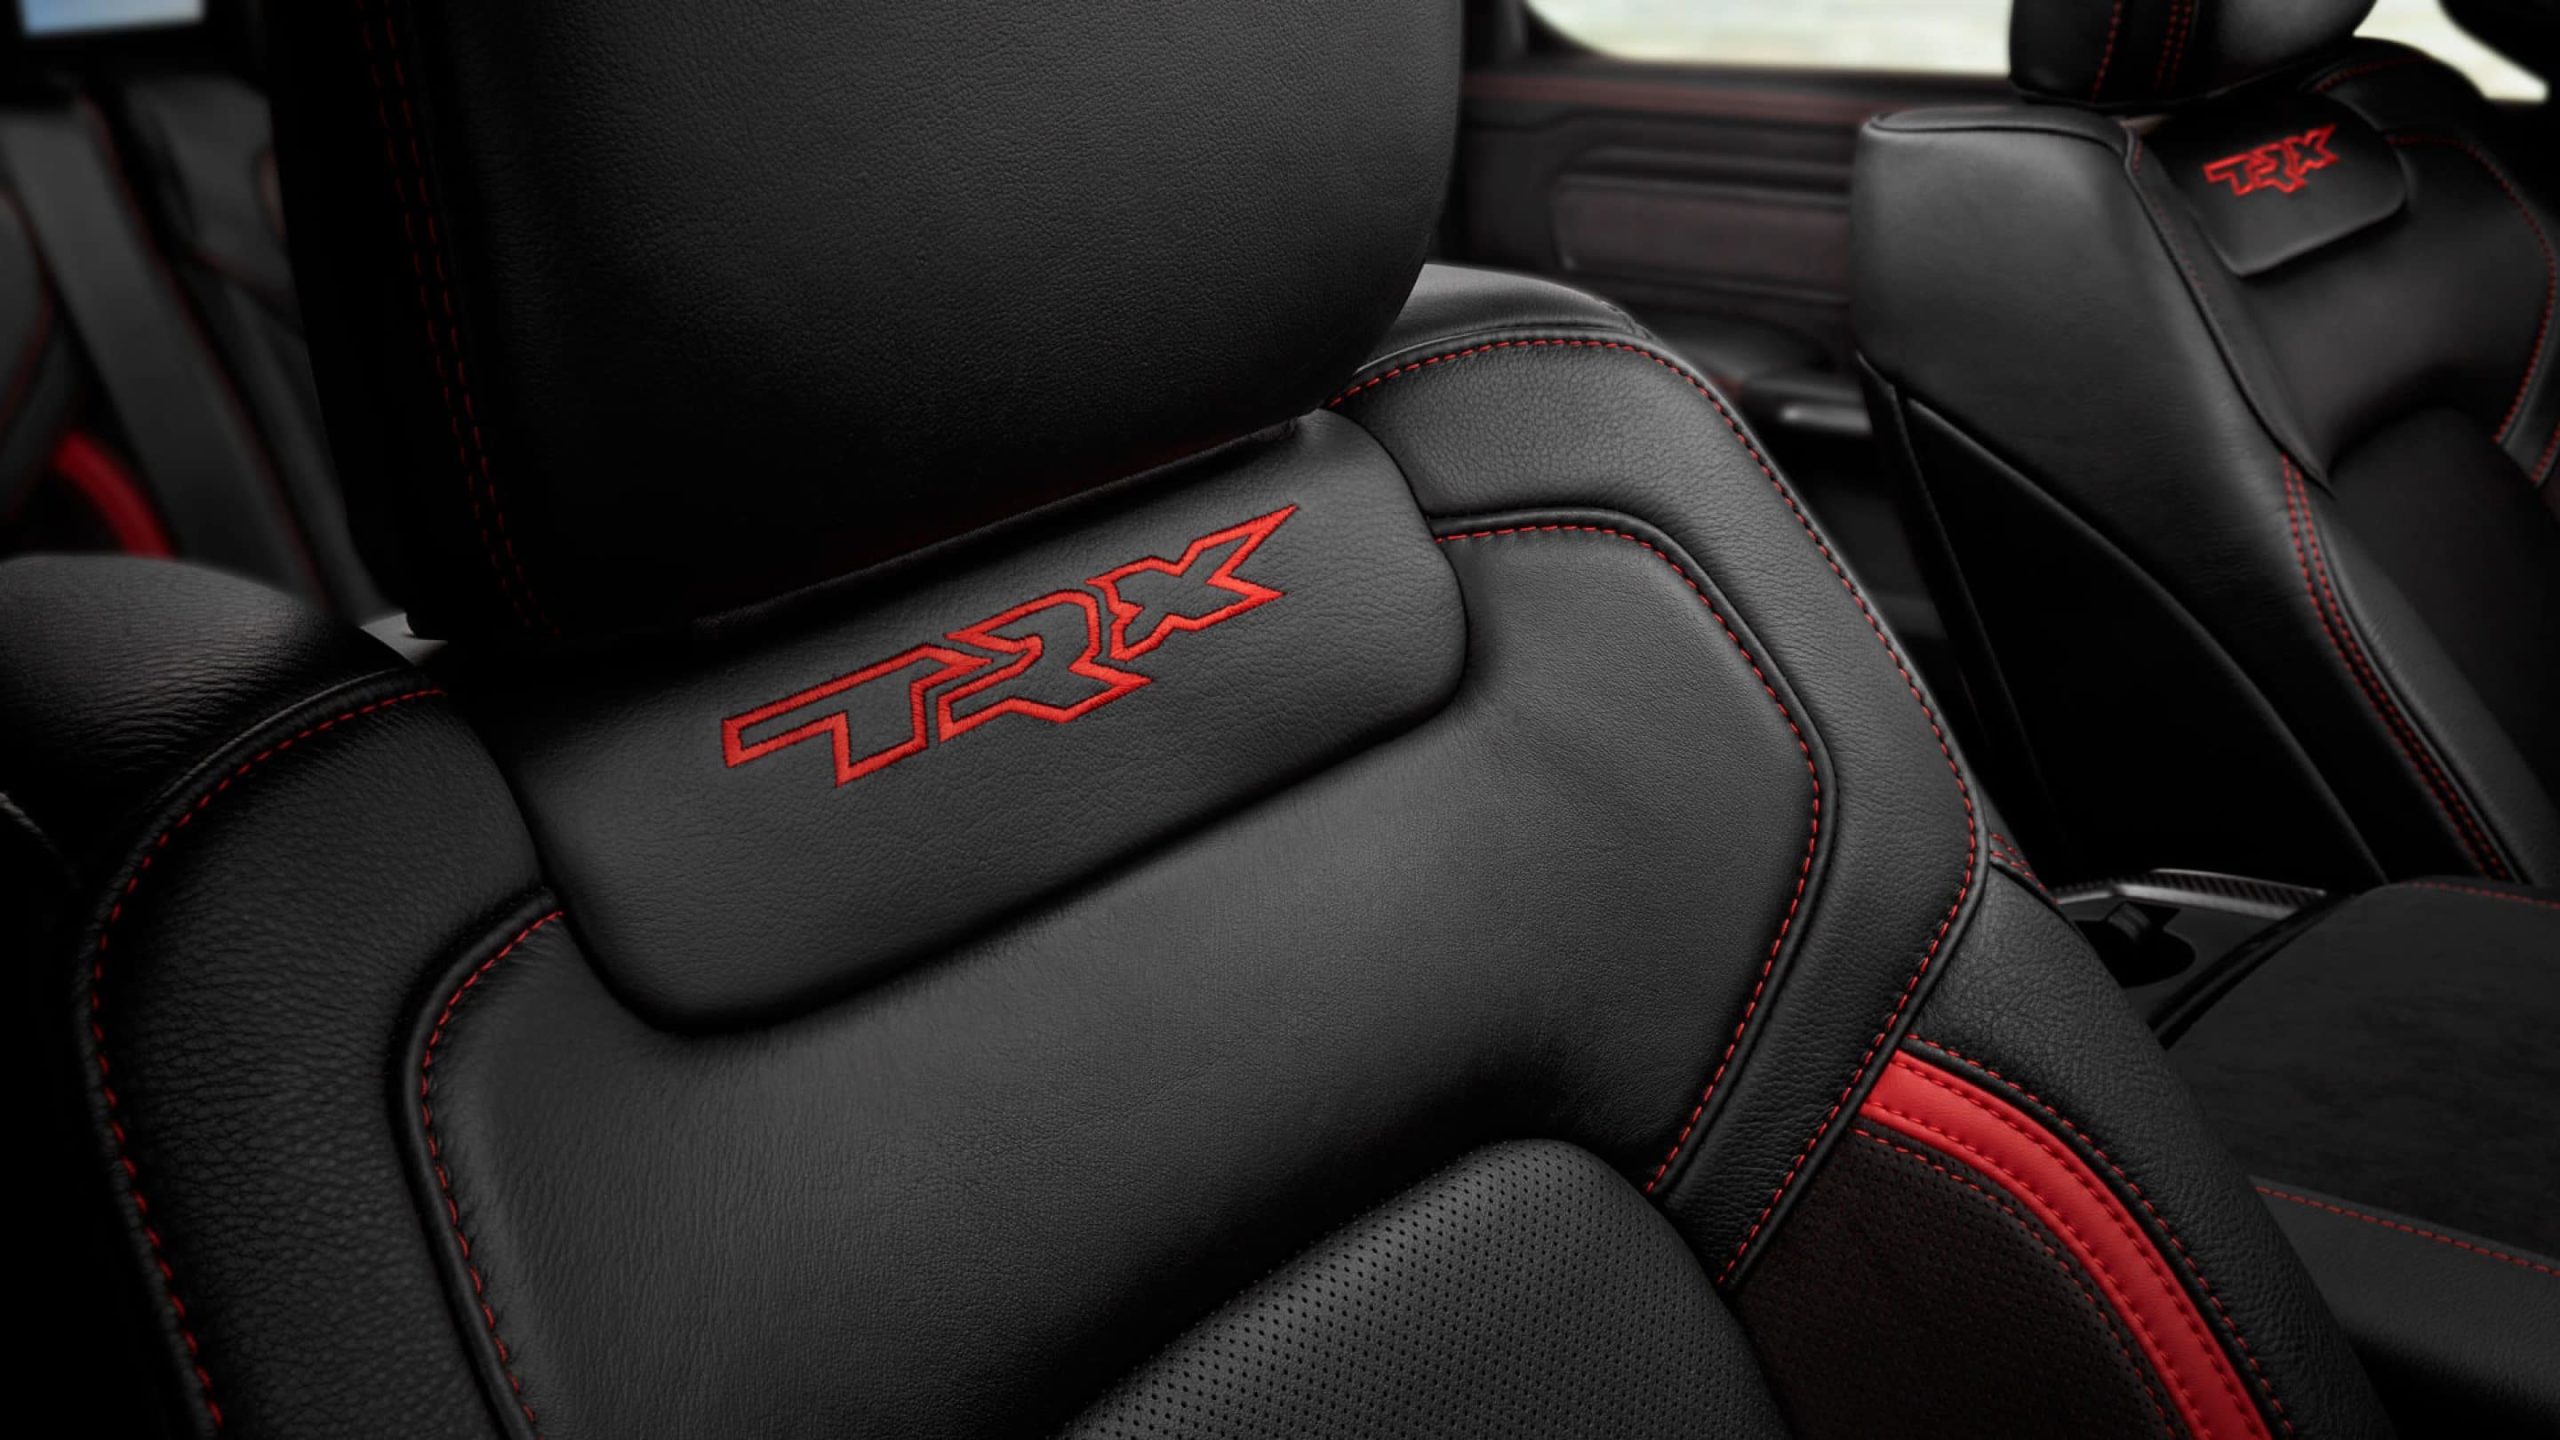 Command the cabin from performance-bolstered front bucket seats featuring a TRX-specific embroidered logo and accent stitching in red needlework.